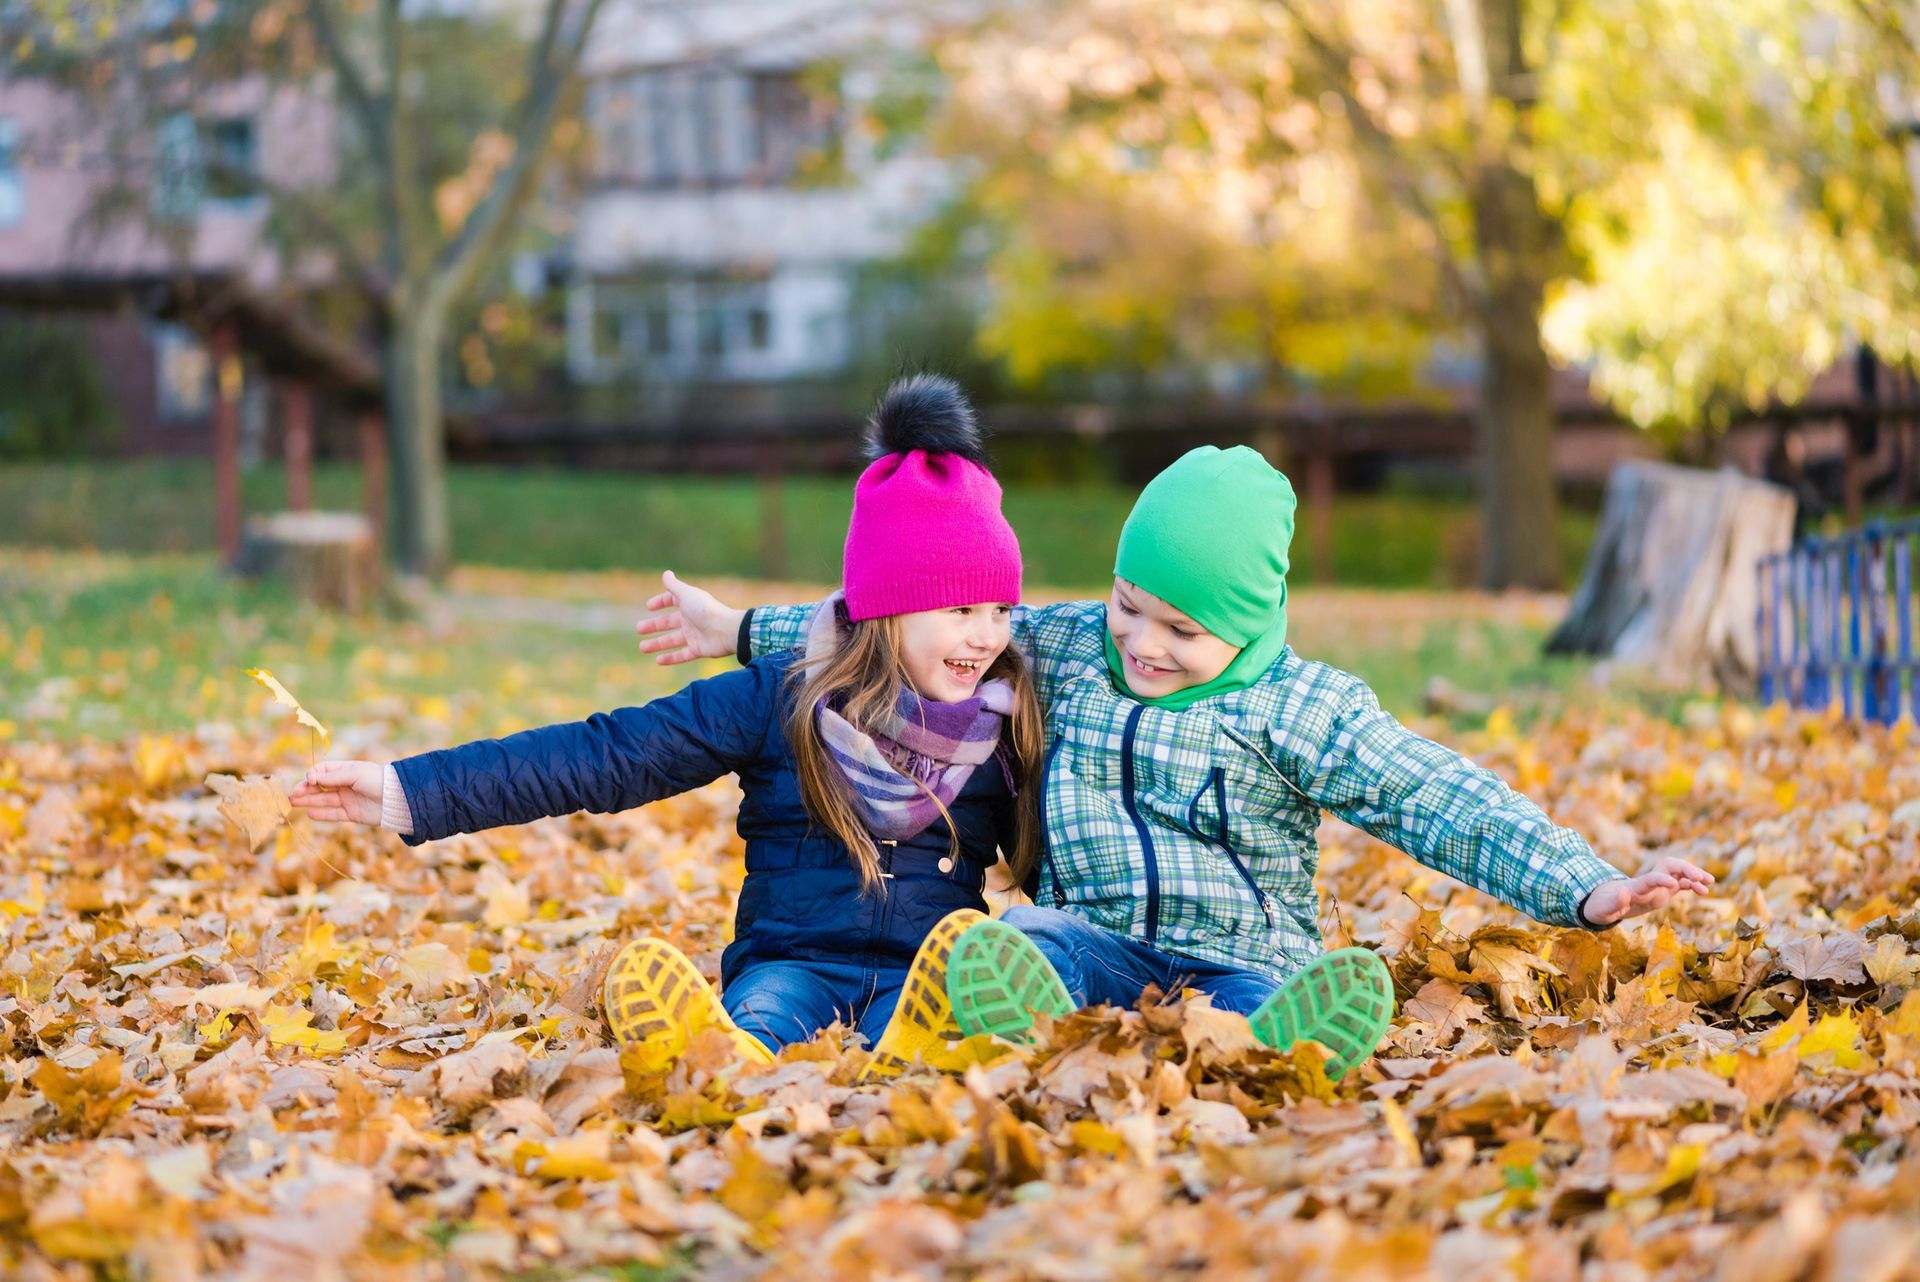 Two children laughing and playing in leaves